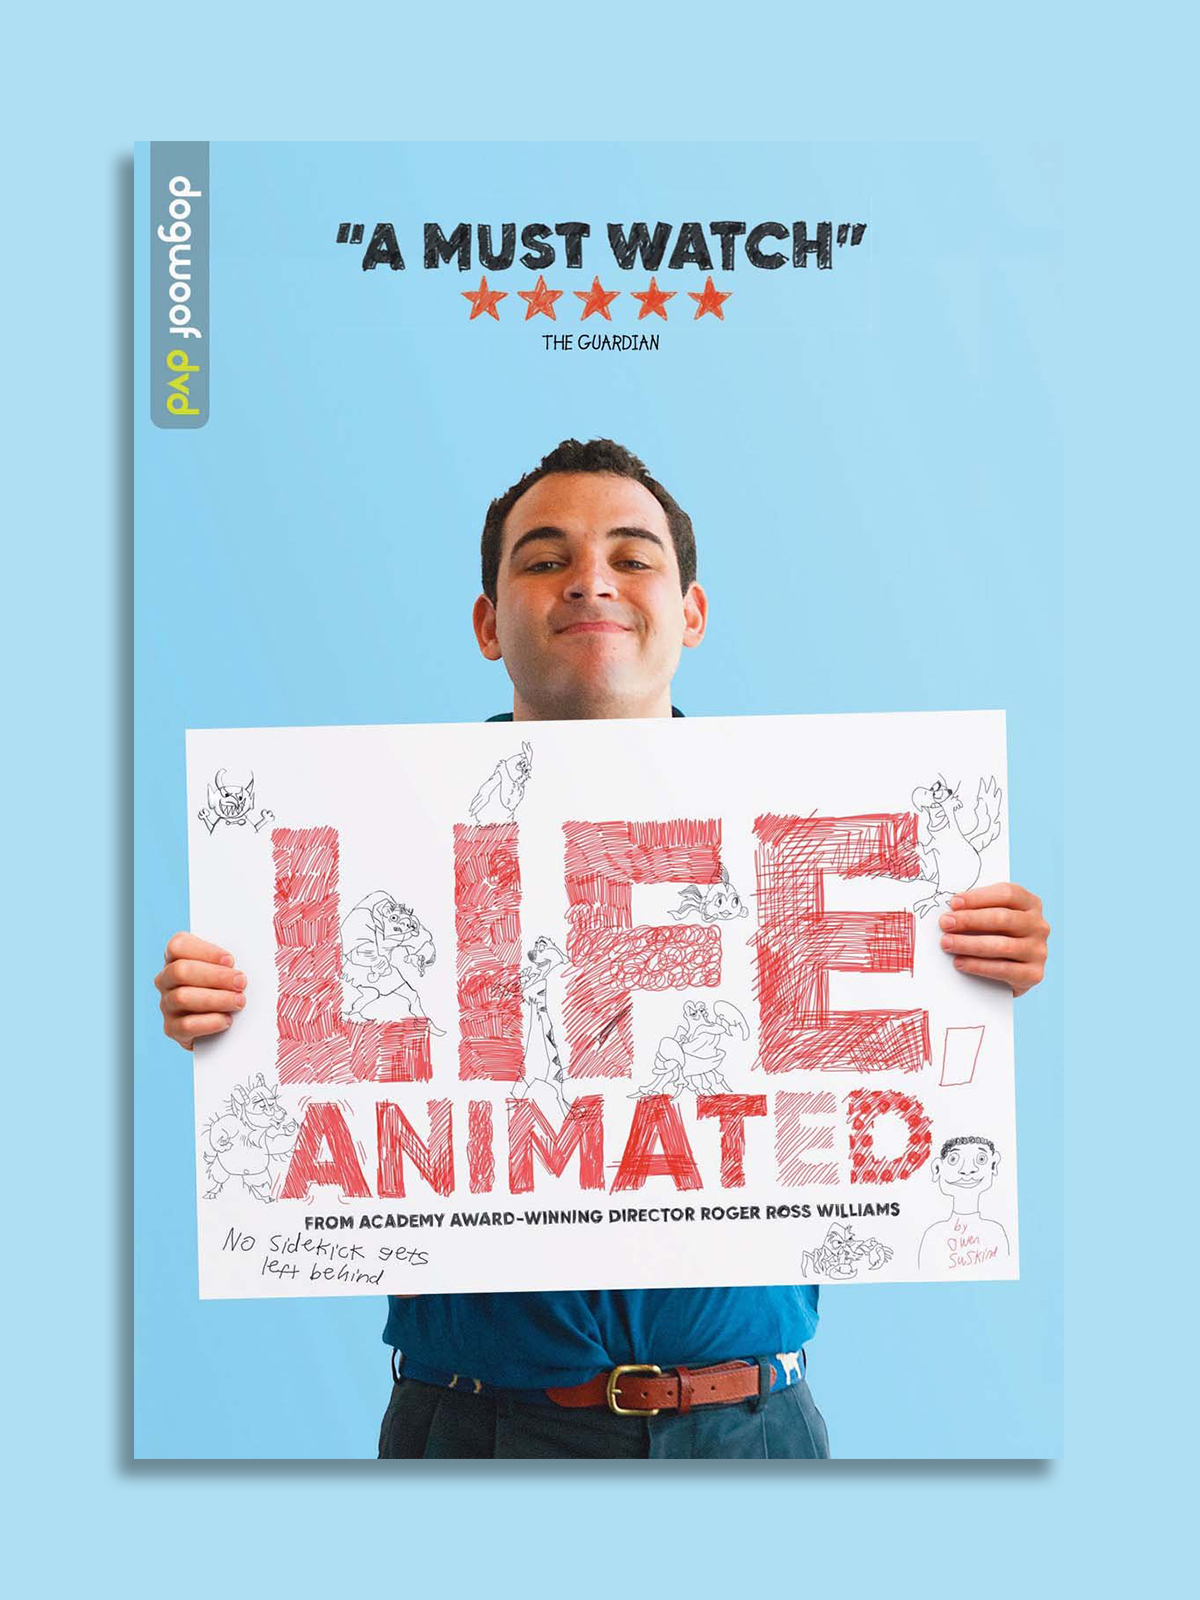 Life, Animated This is the uplifting story of Owen Suskind, a kid with autism who was unable to speak until his family discovered a unique way to communicate by immersing themselves in the world of classic Disney animated films. At its core is one family's love, resilience, and determination to never give up on each other. It breaks your heart, makes you laugh, and fills you with empathy for anyone living on the peripheral of what's considered "normal."